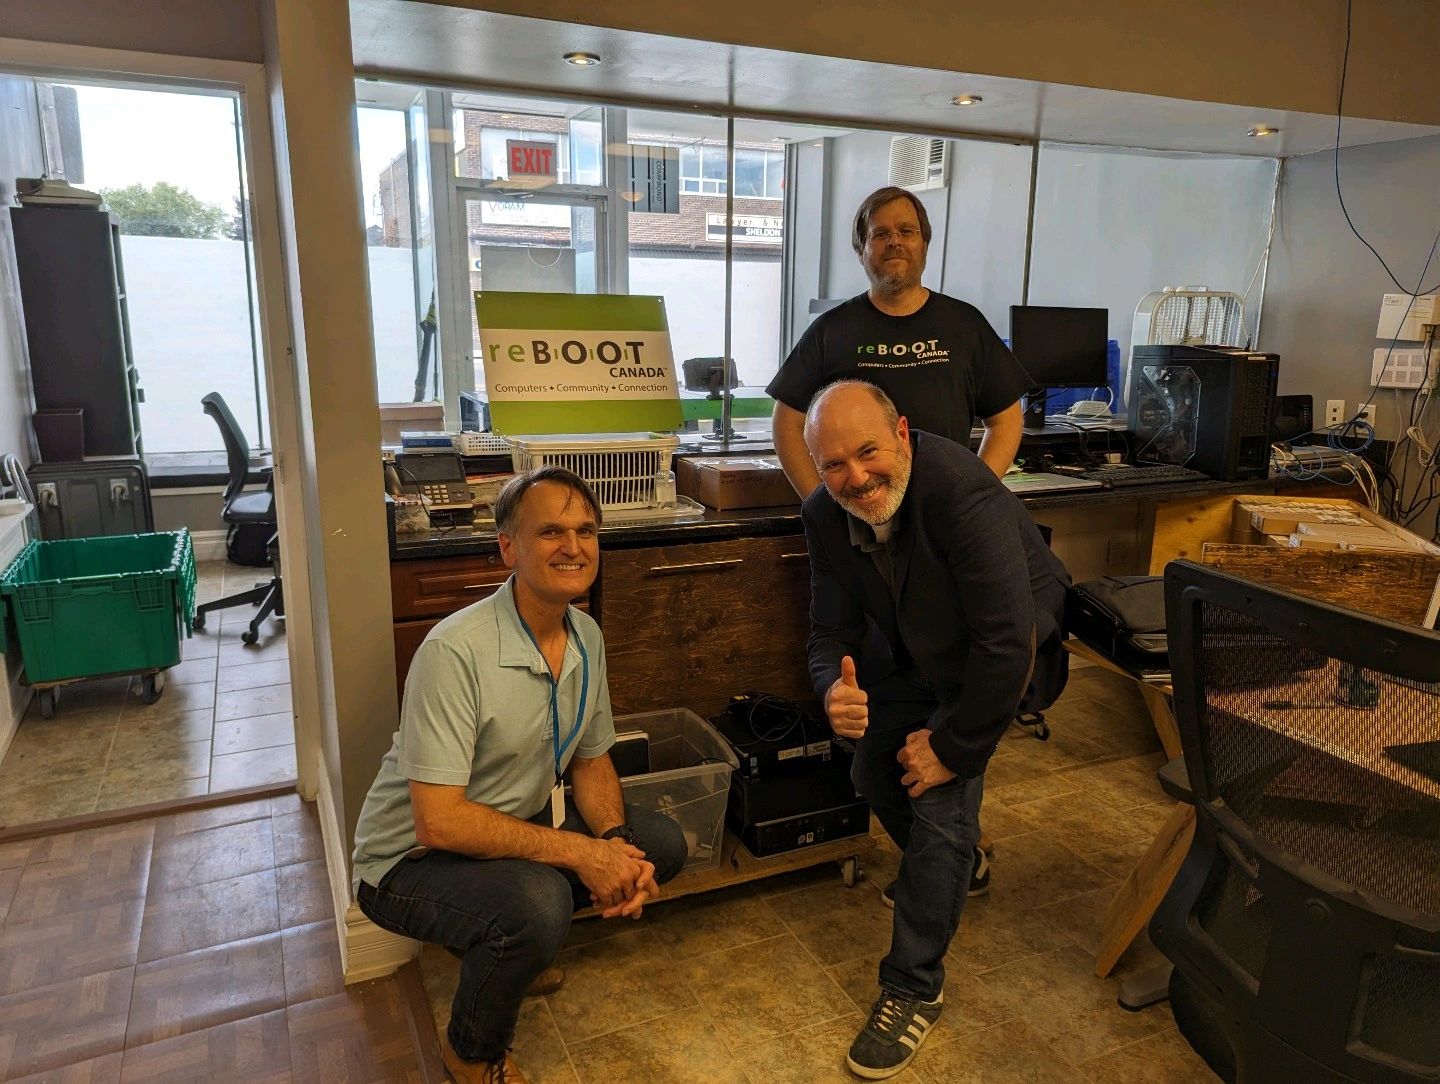 Jamie Johnson (center) helps Franc Rota and Lars Verholt organize the new office space.